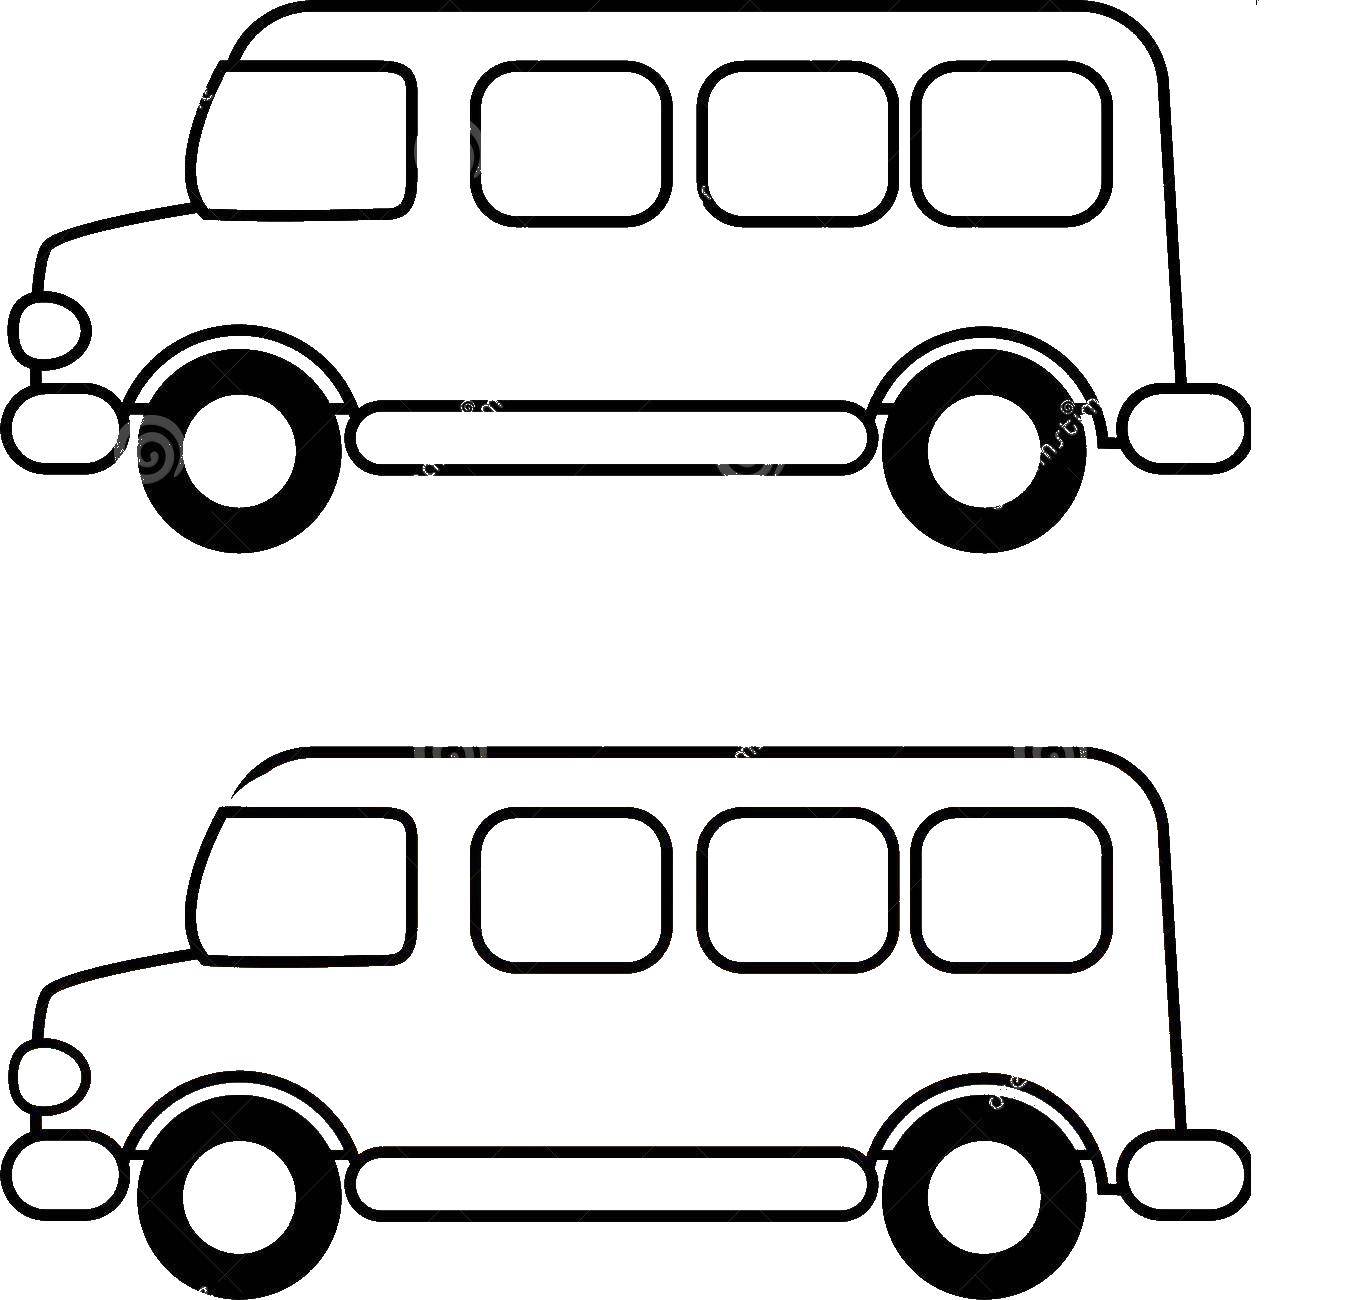 Coloring Bus. Category The contour of the bus. Tags:  the bus.